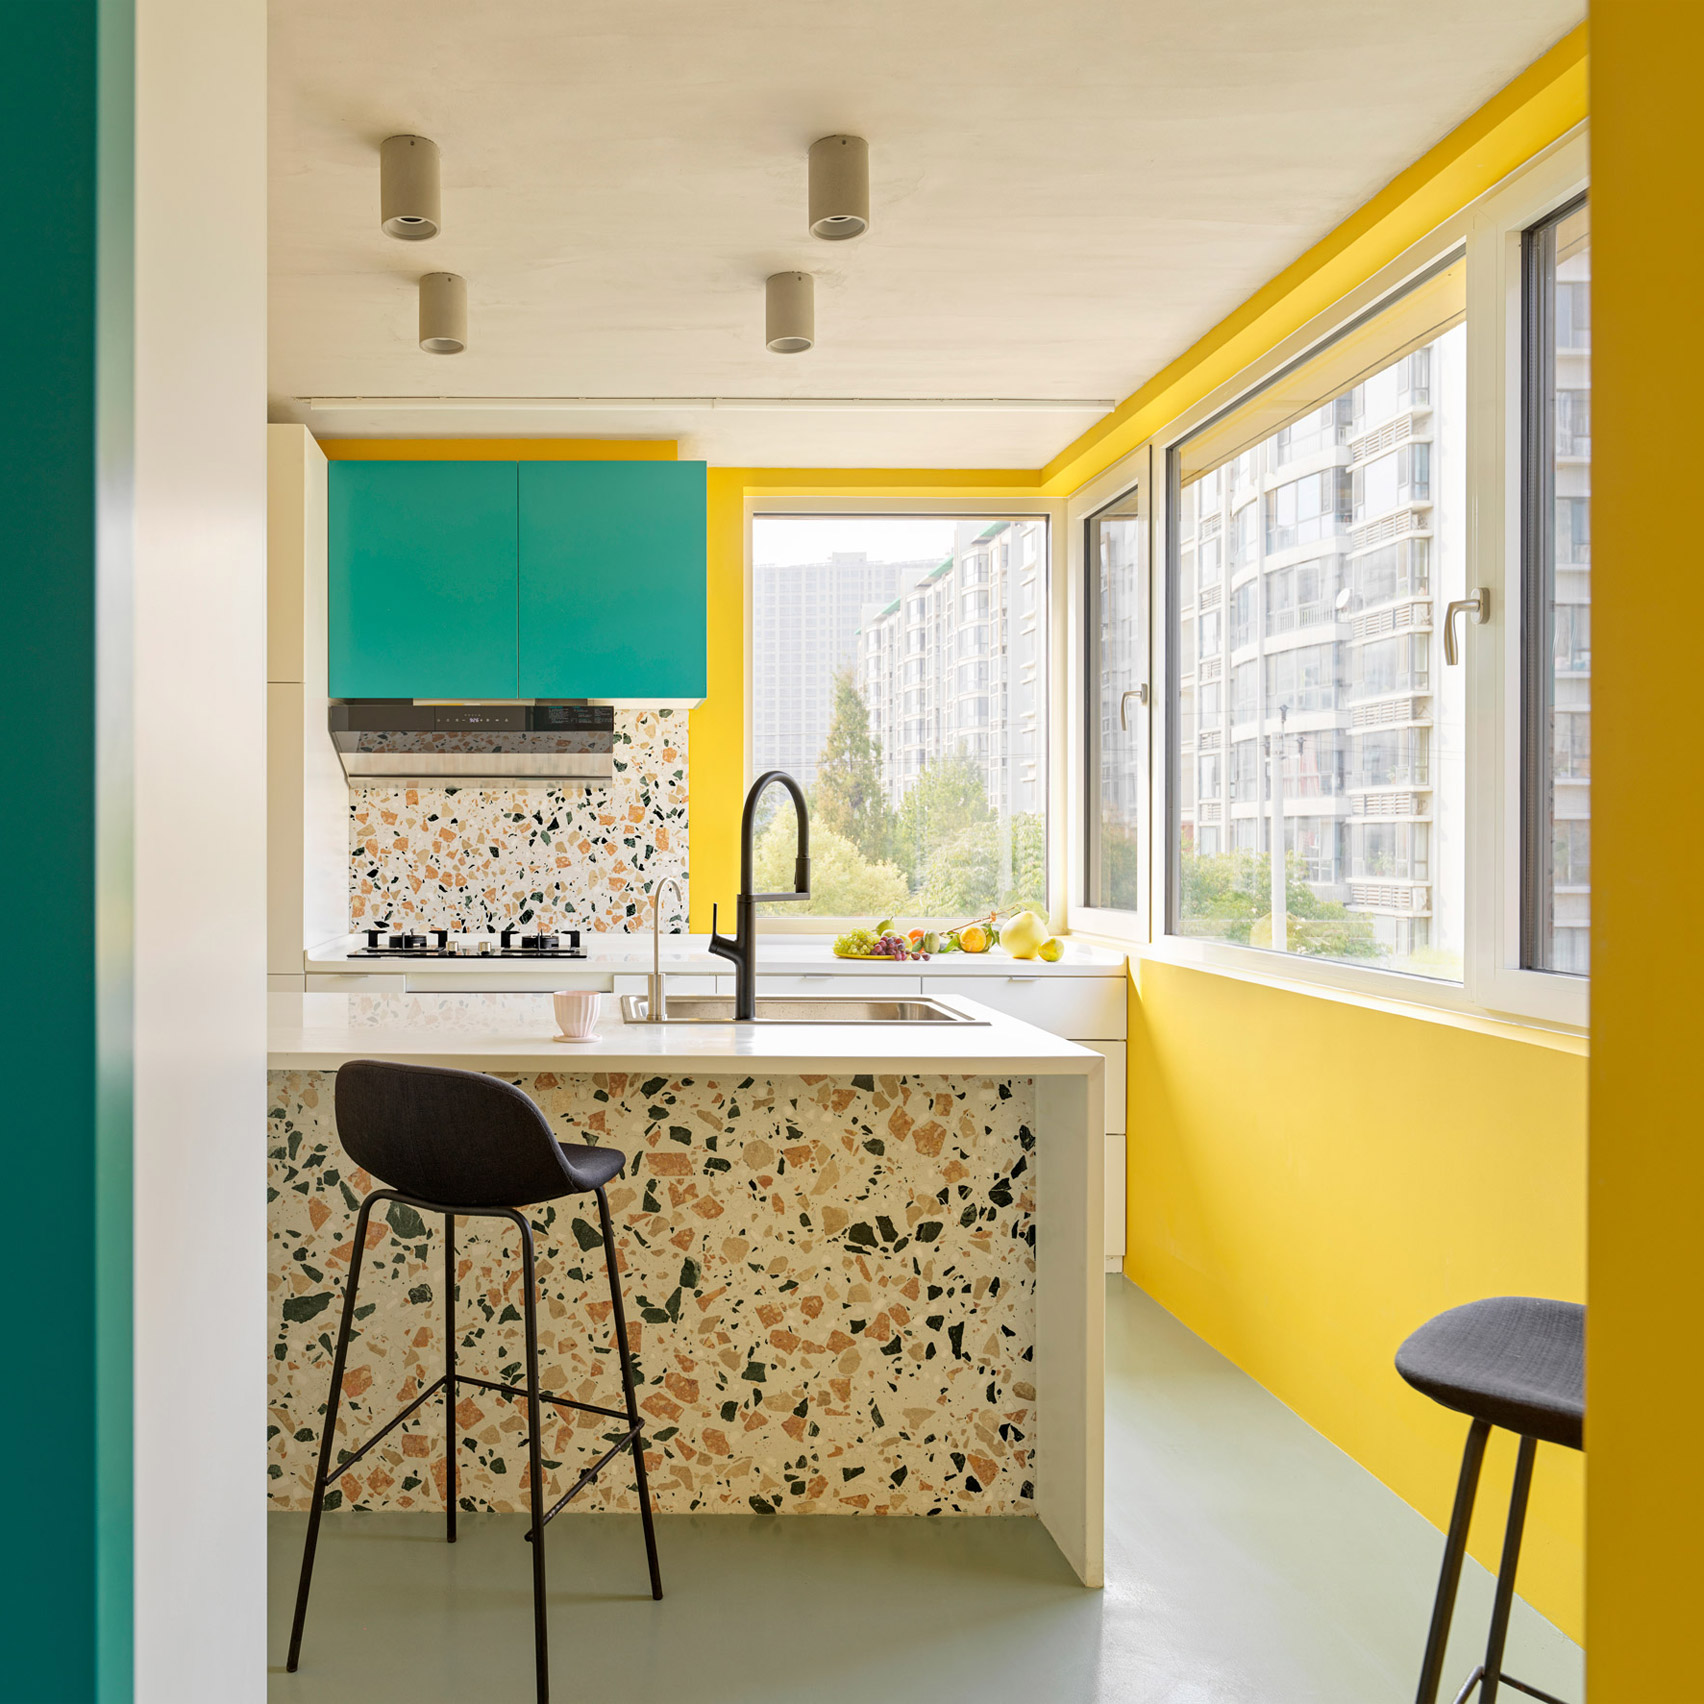 Bright yellow and turquoise kitchen 